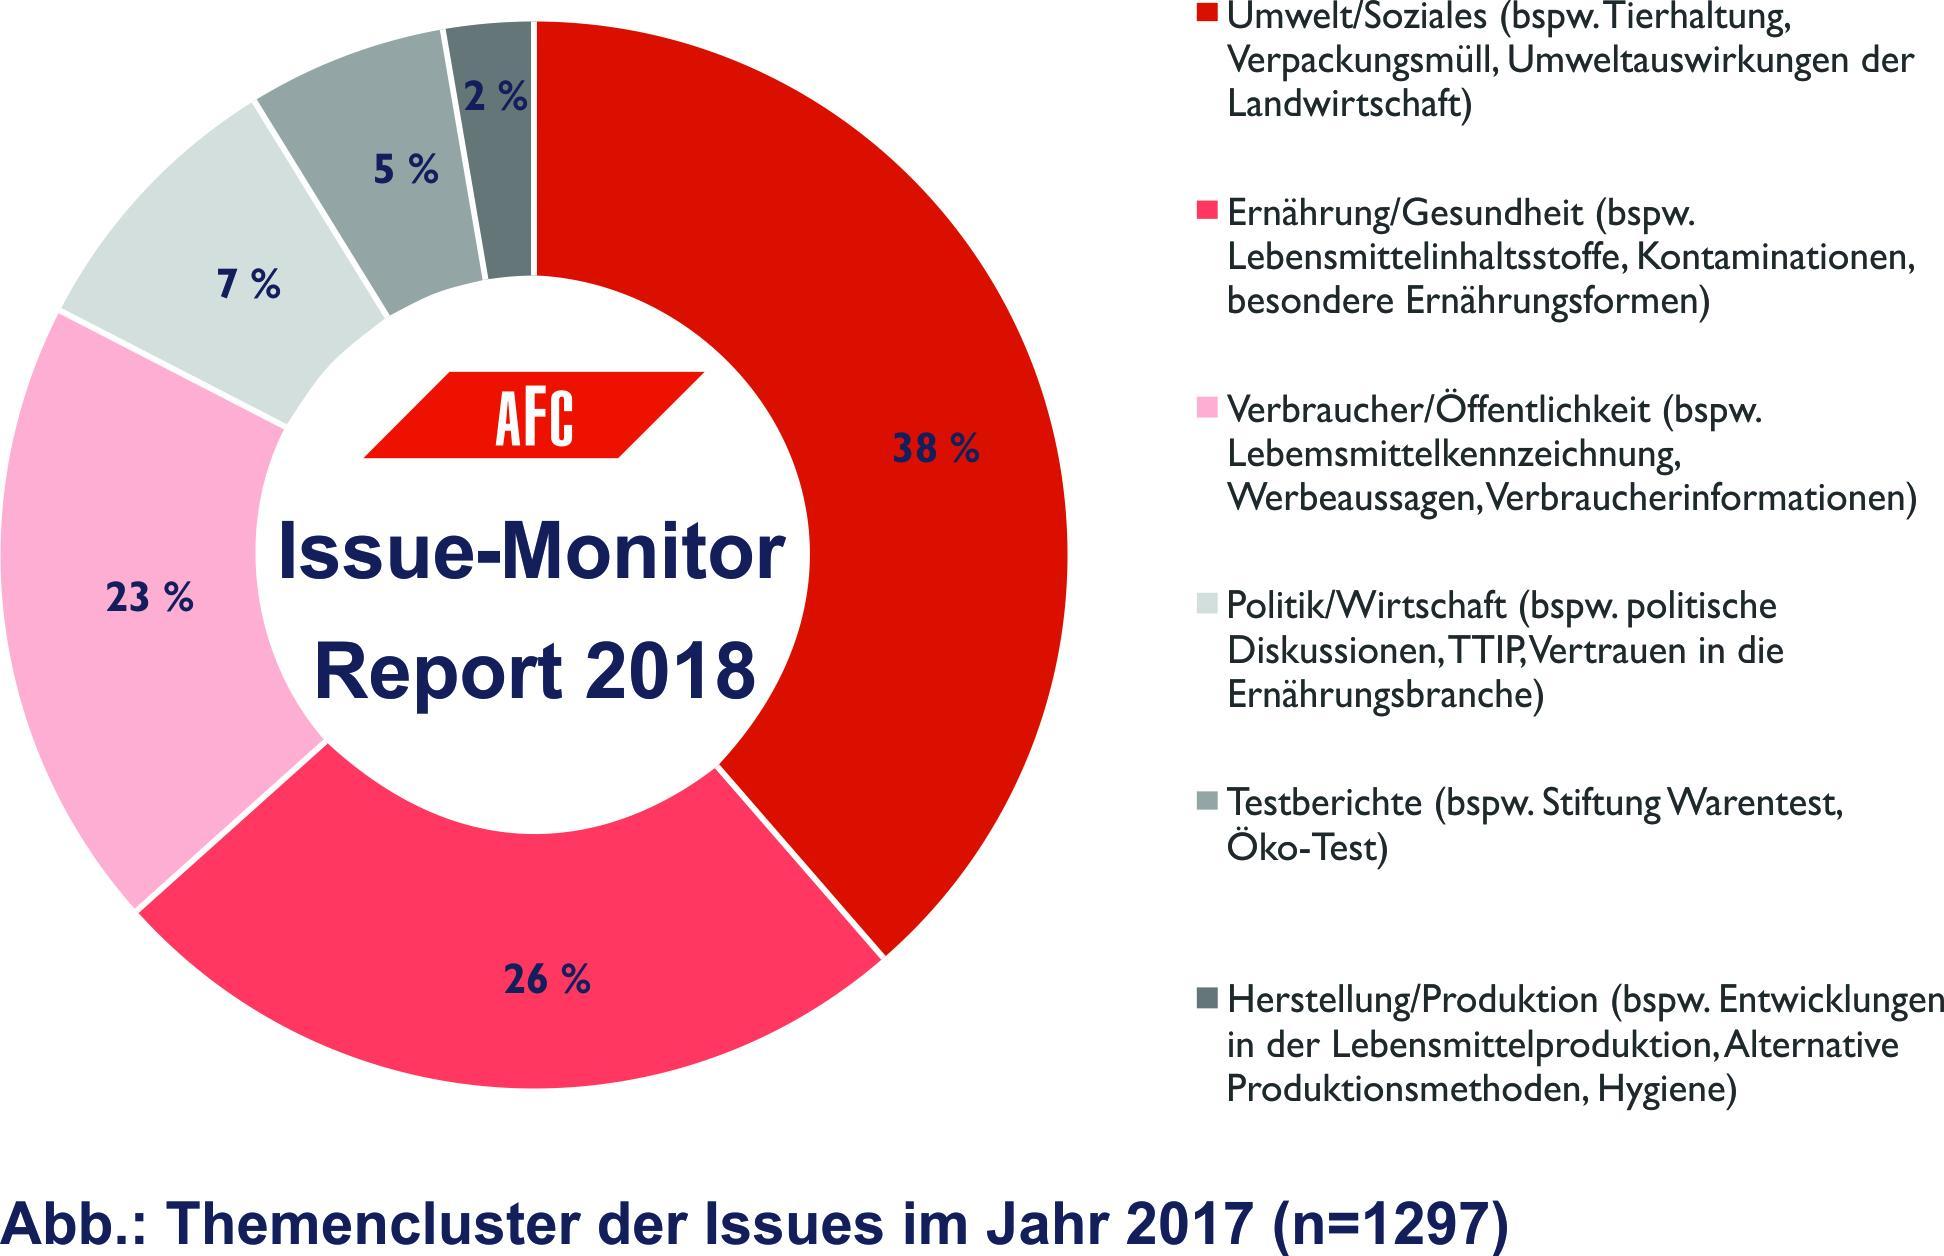 AFC-Issue-Monitor Report 2018